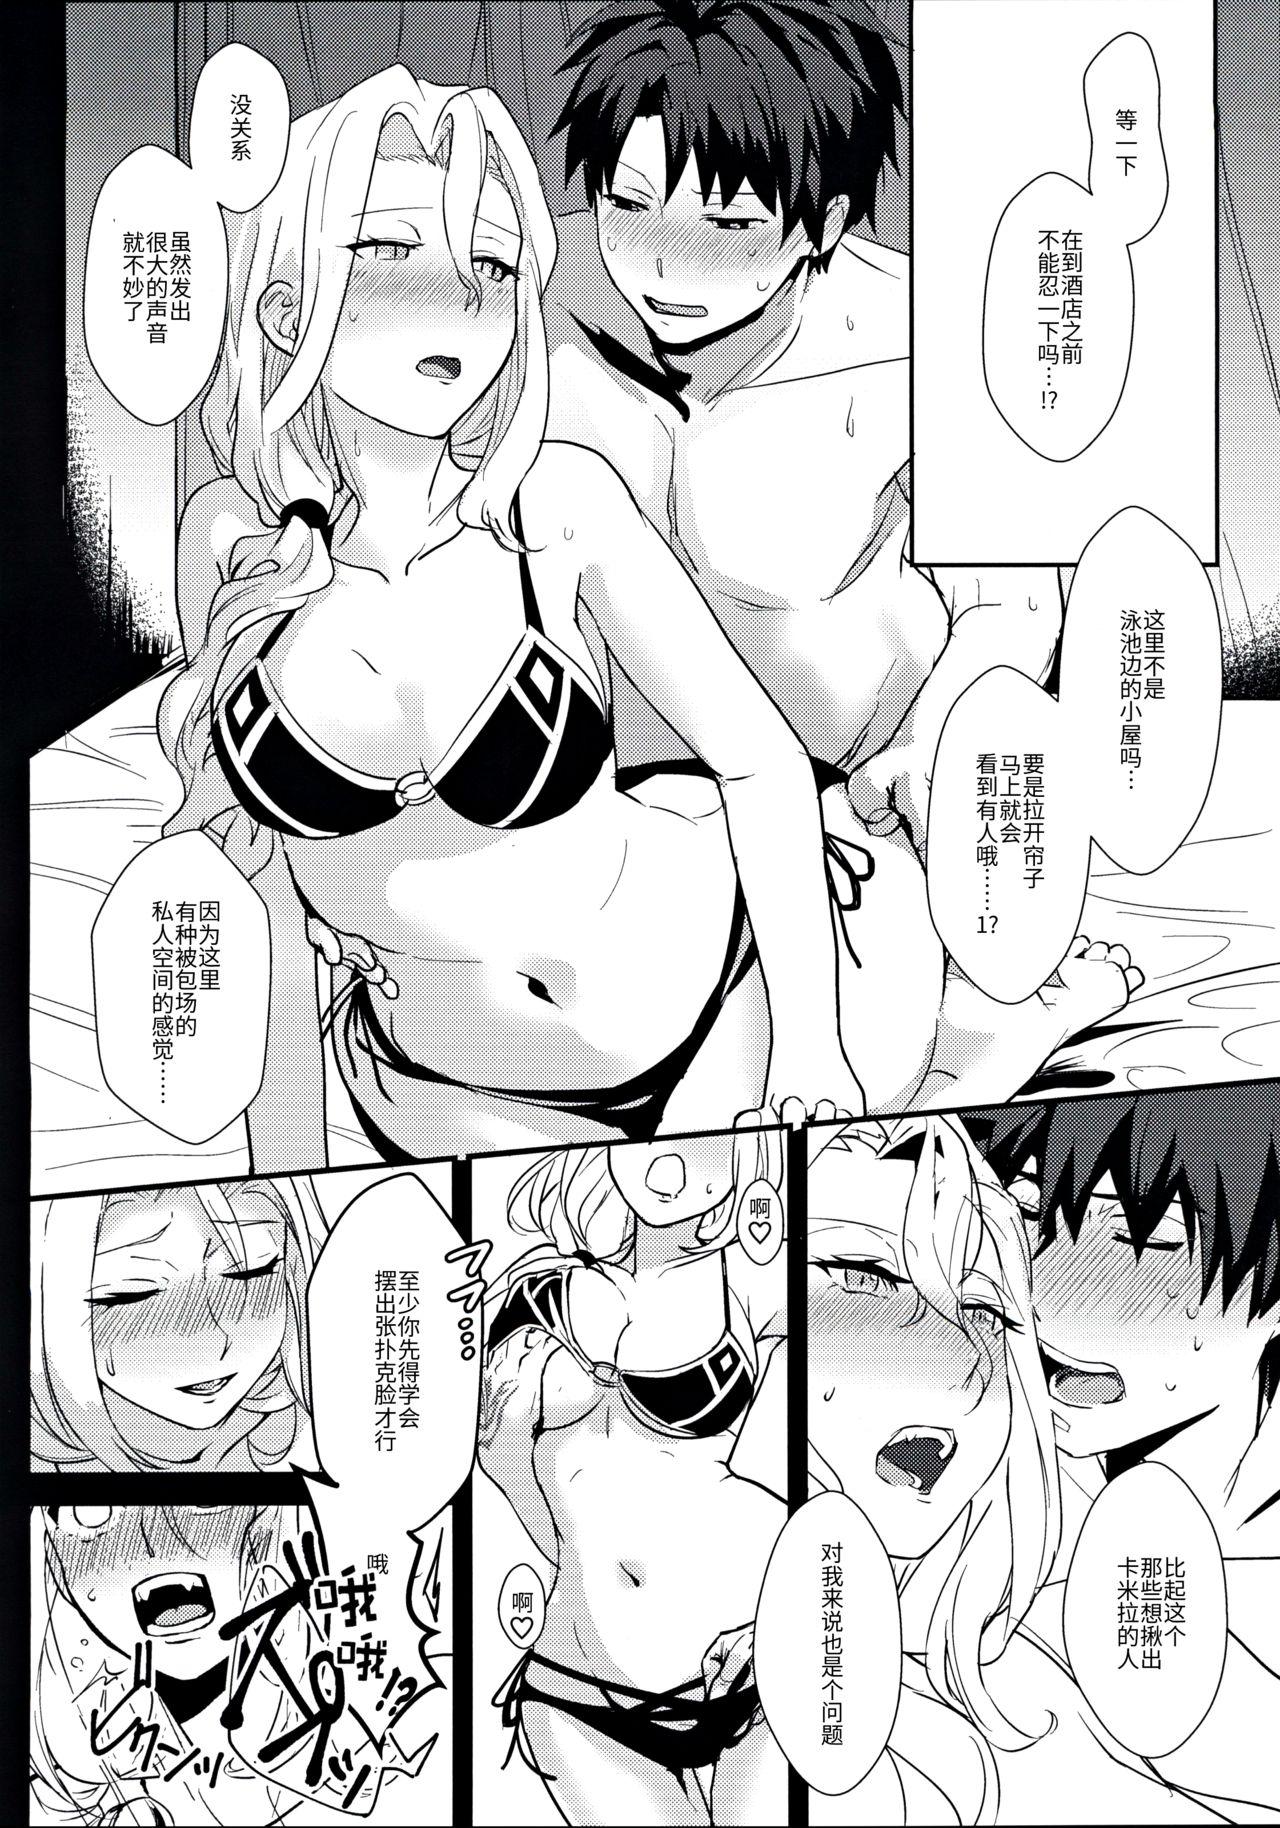 Tit POOL SIDE MIRAGE - Fate grand order Teenxxx - Page 10